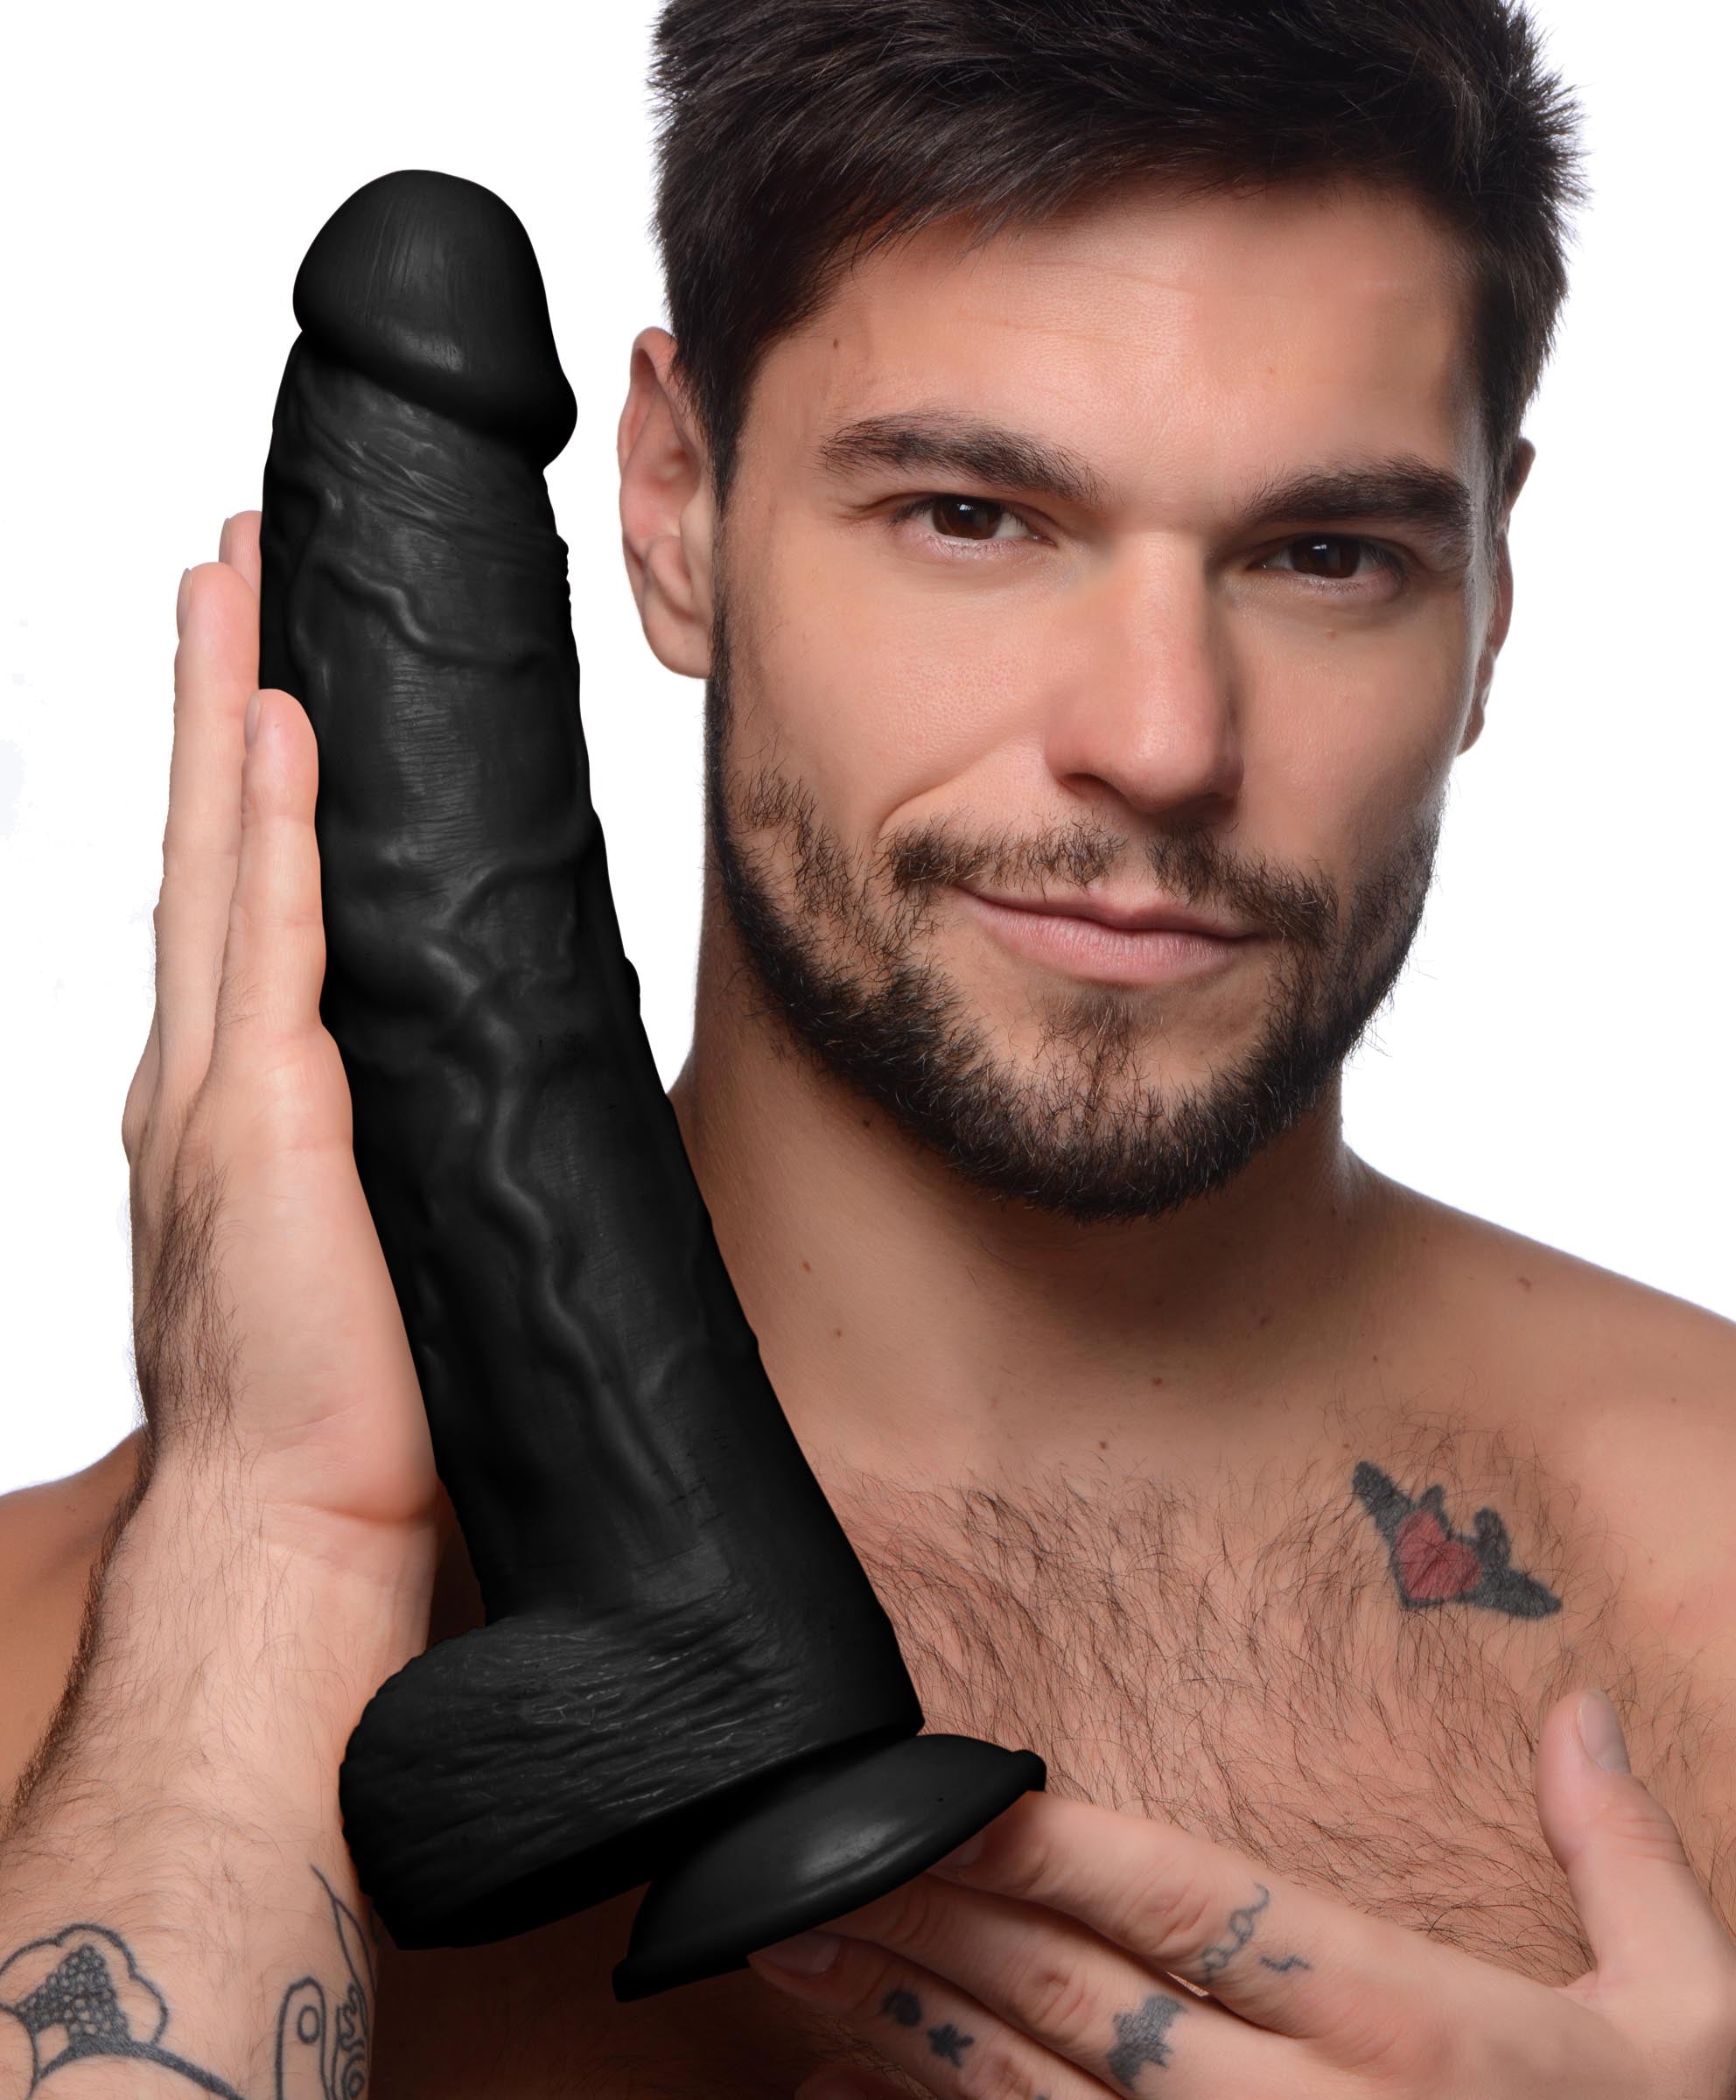 Hung Harry 11.75 Inch Dildo with Balls